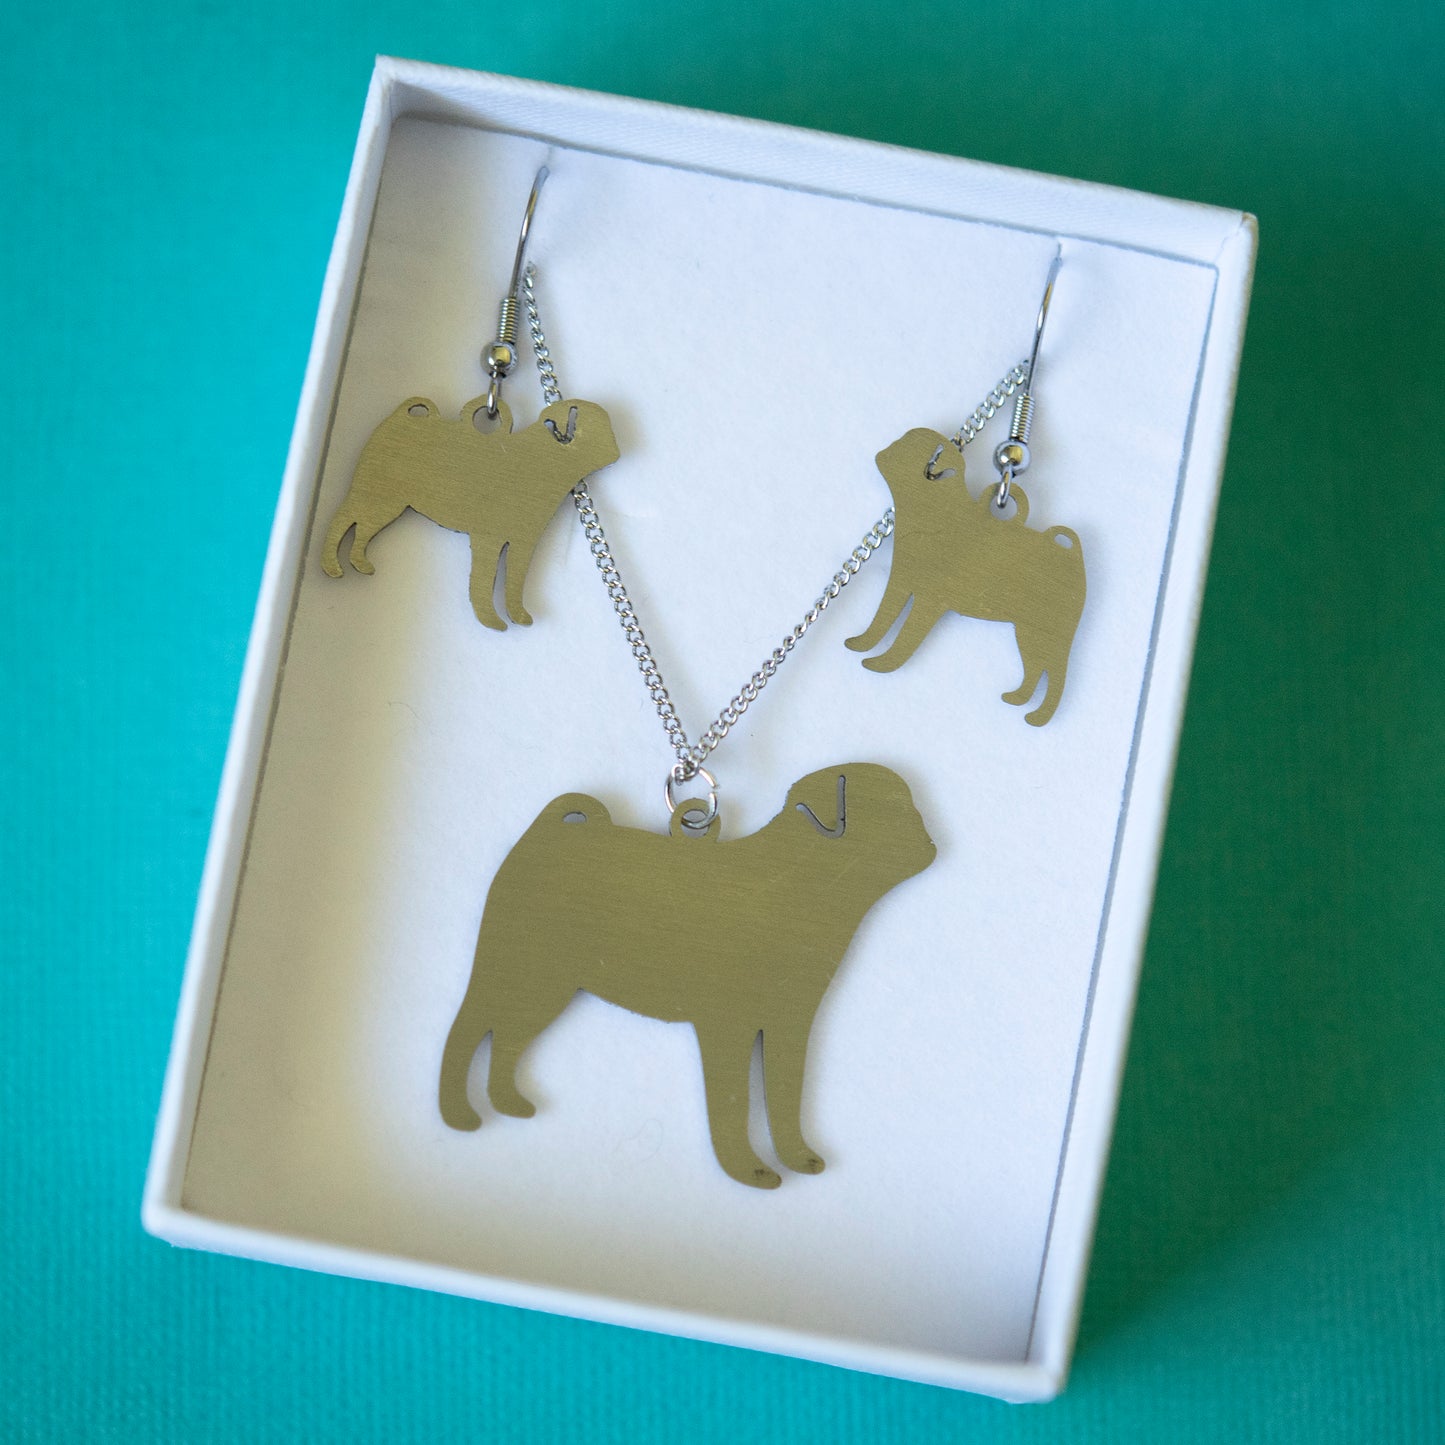 Pug Silhouette Necklace & Earrings Set